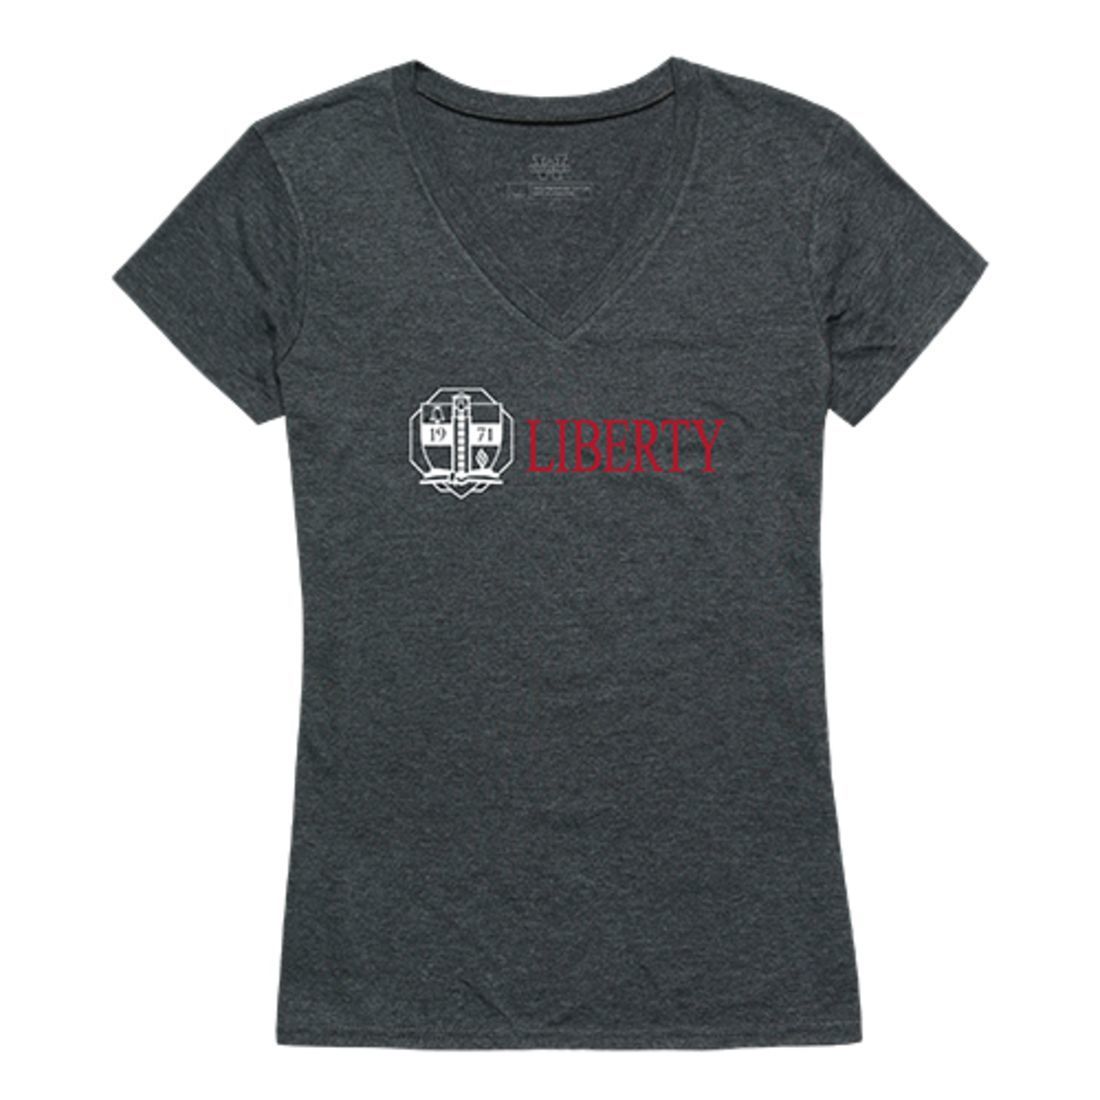 Liberty University Flames Womens Institutional Tee T-Shirt Heather Charcoal-Campus-Wardrobe